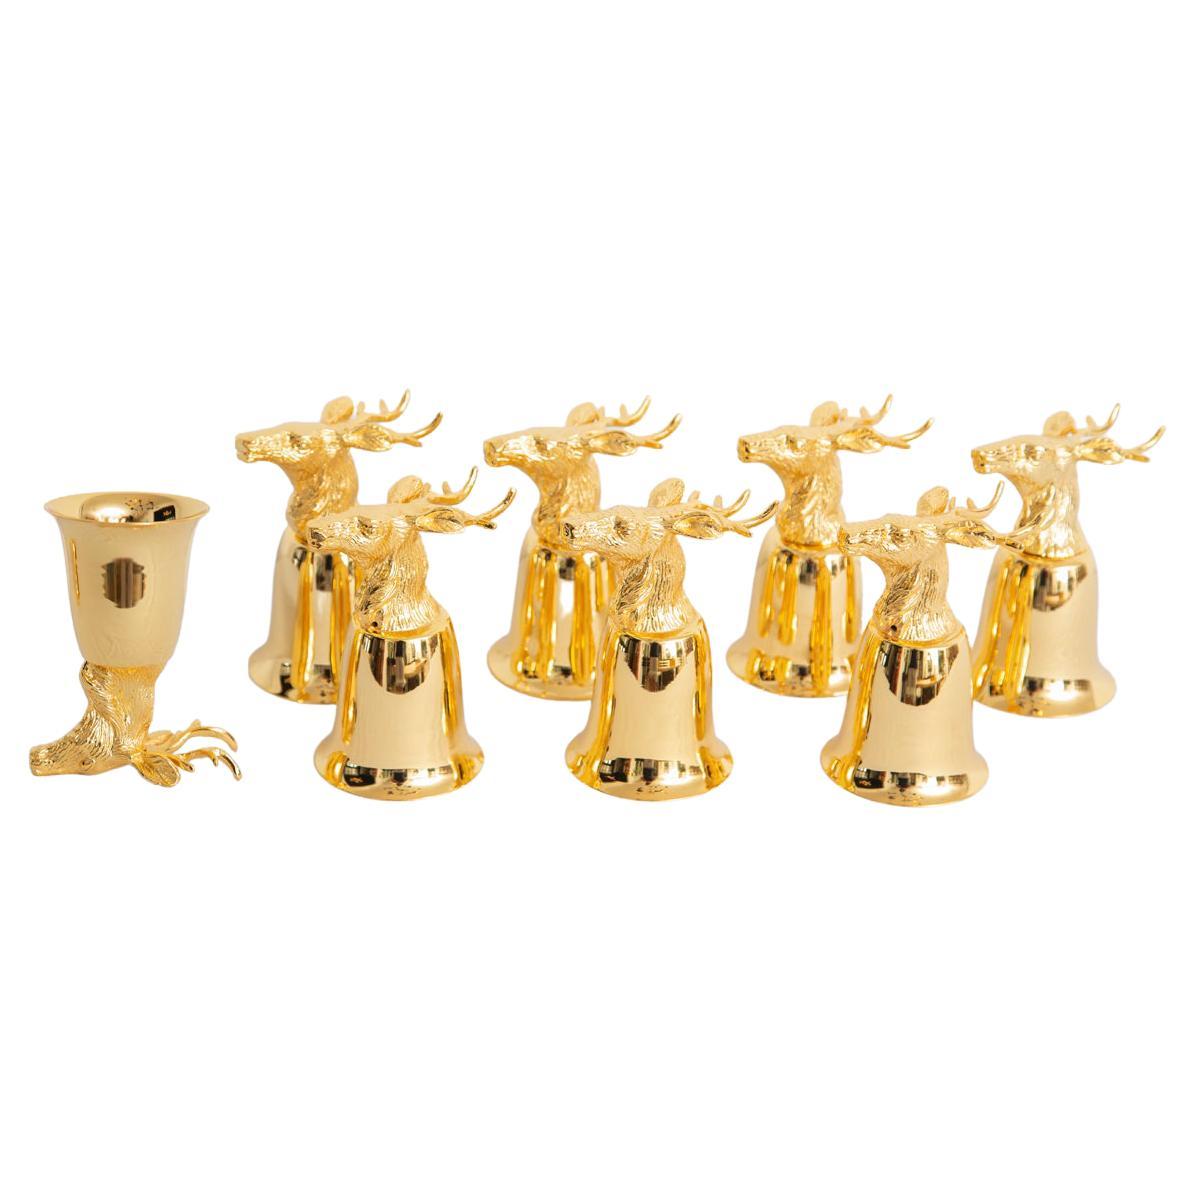 Set of 8 Gold Plated Stirrup Cups Goblets with Animal Heads, Stags